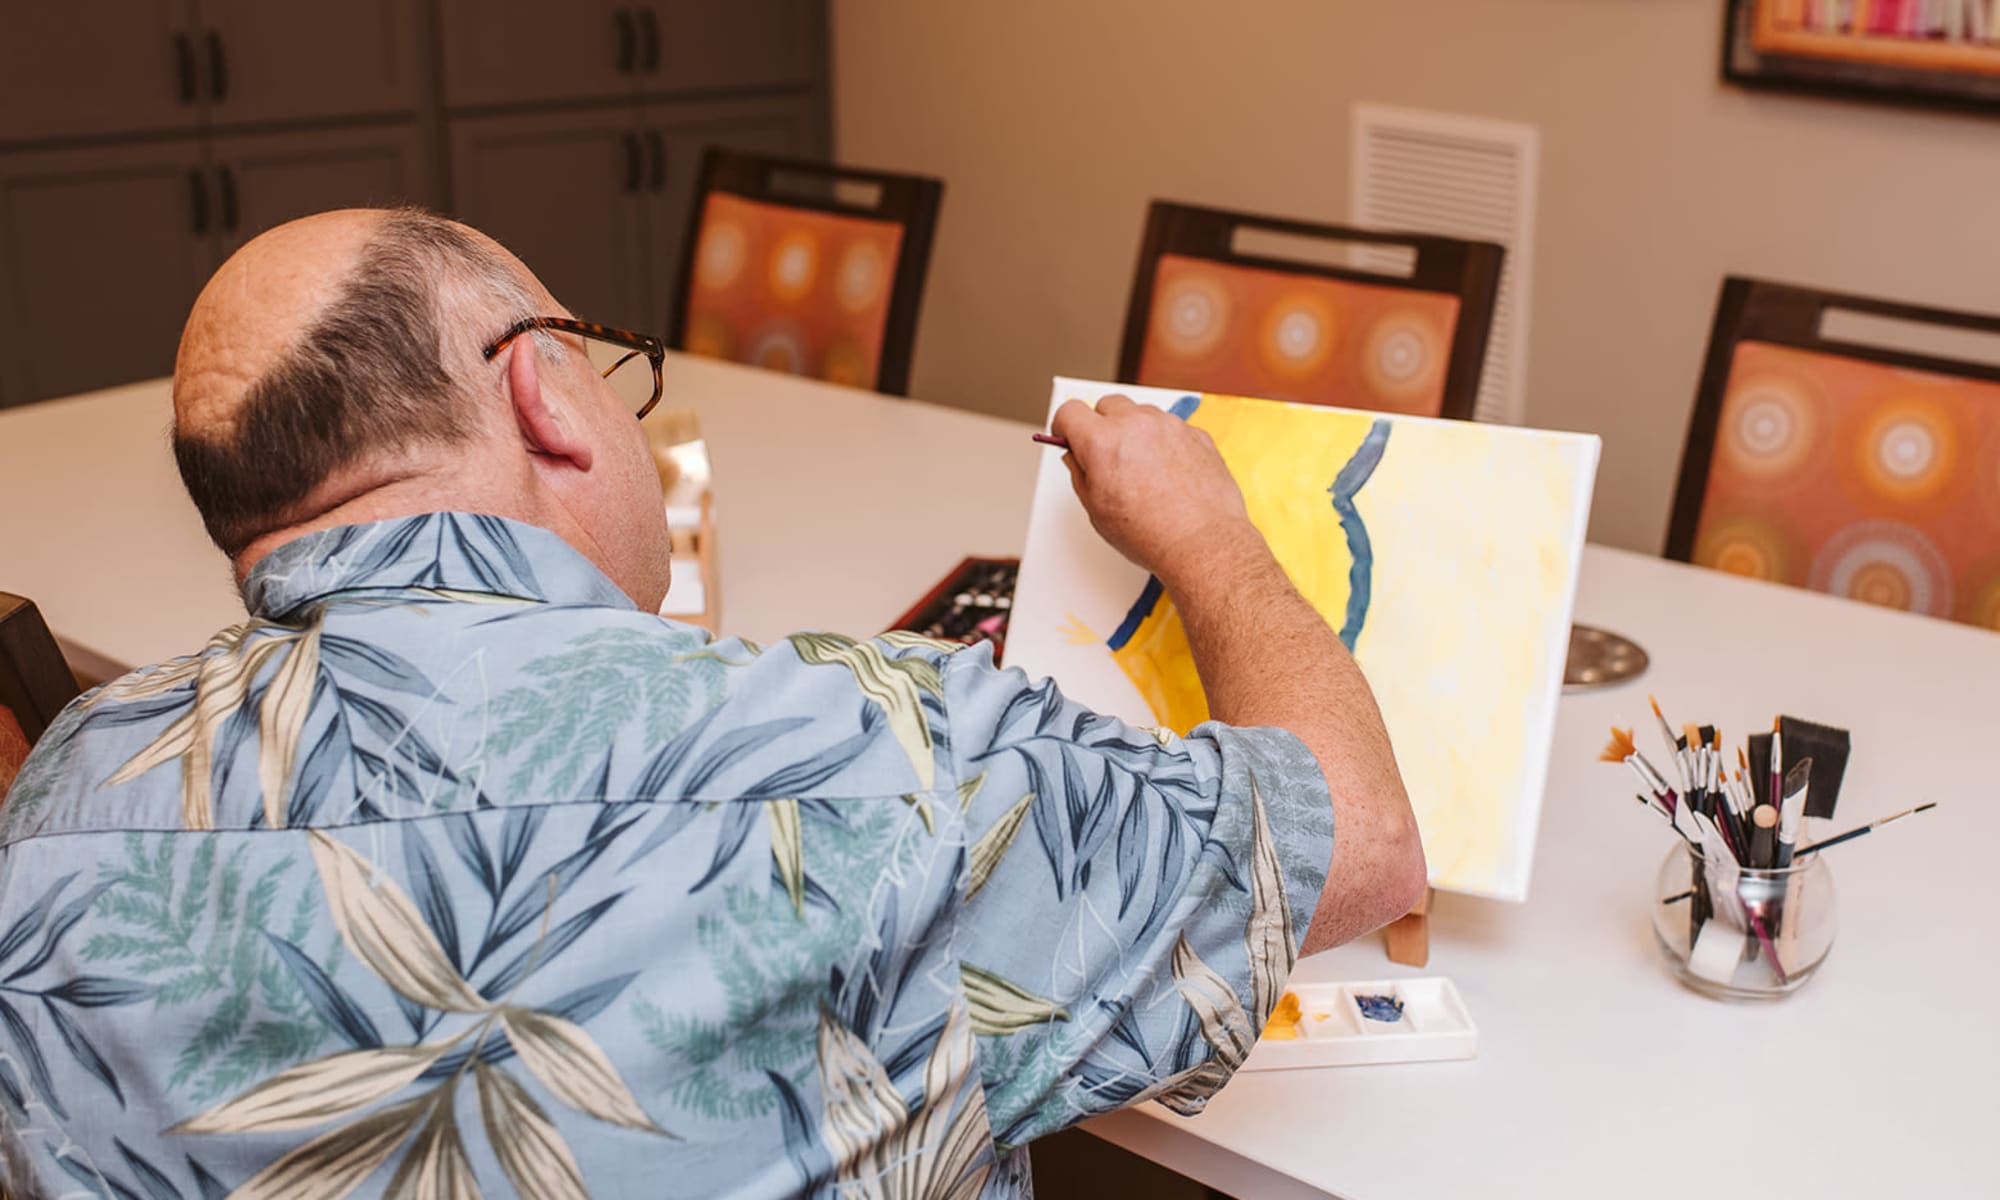 Residents doing Arts and Crafts at Wildcat Senior Living in Summerville, South Carolina